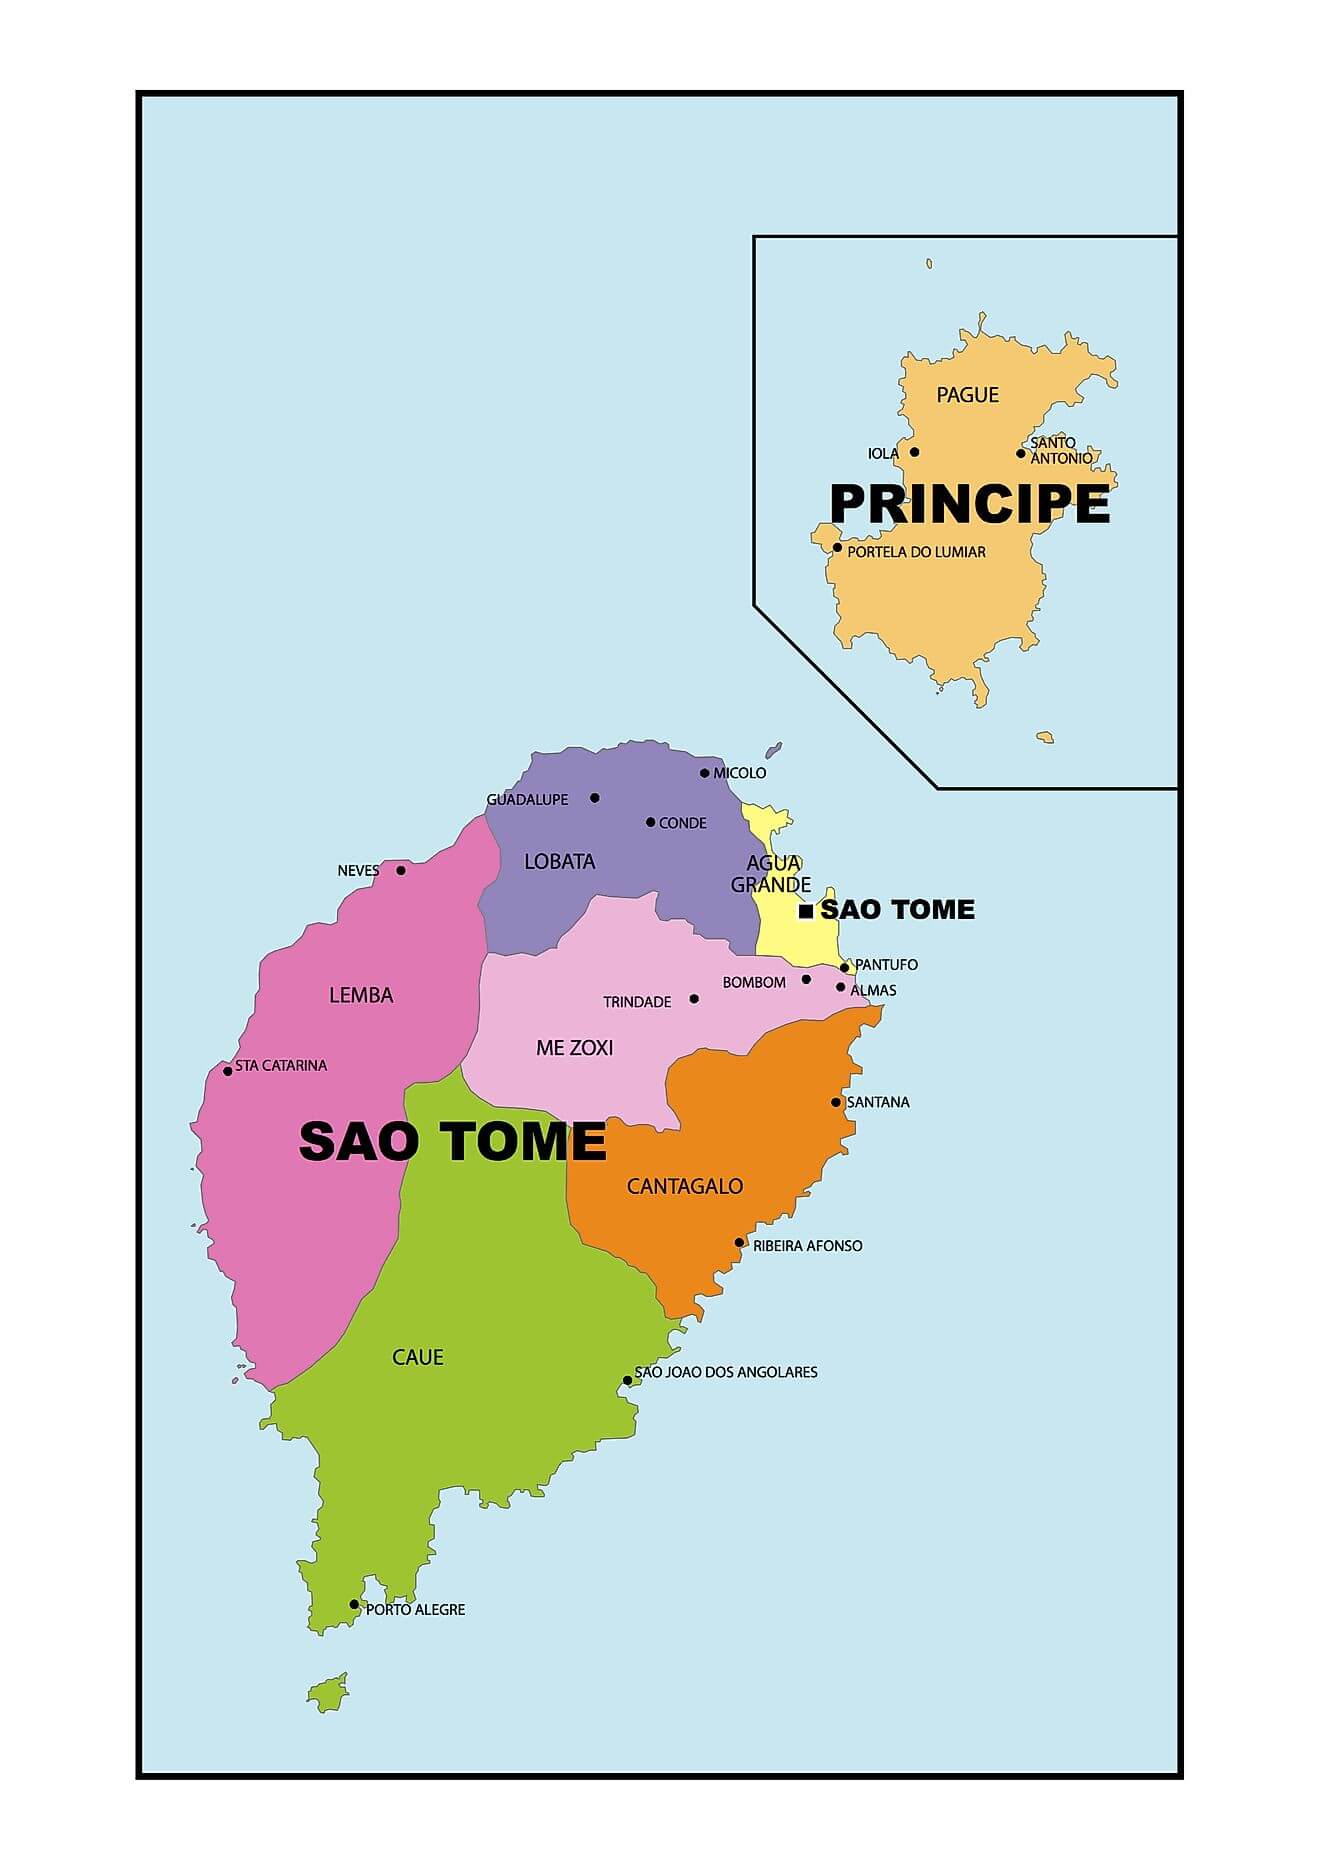 Districts of Sao Tome and Principe Map